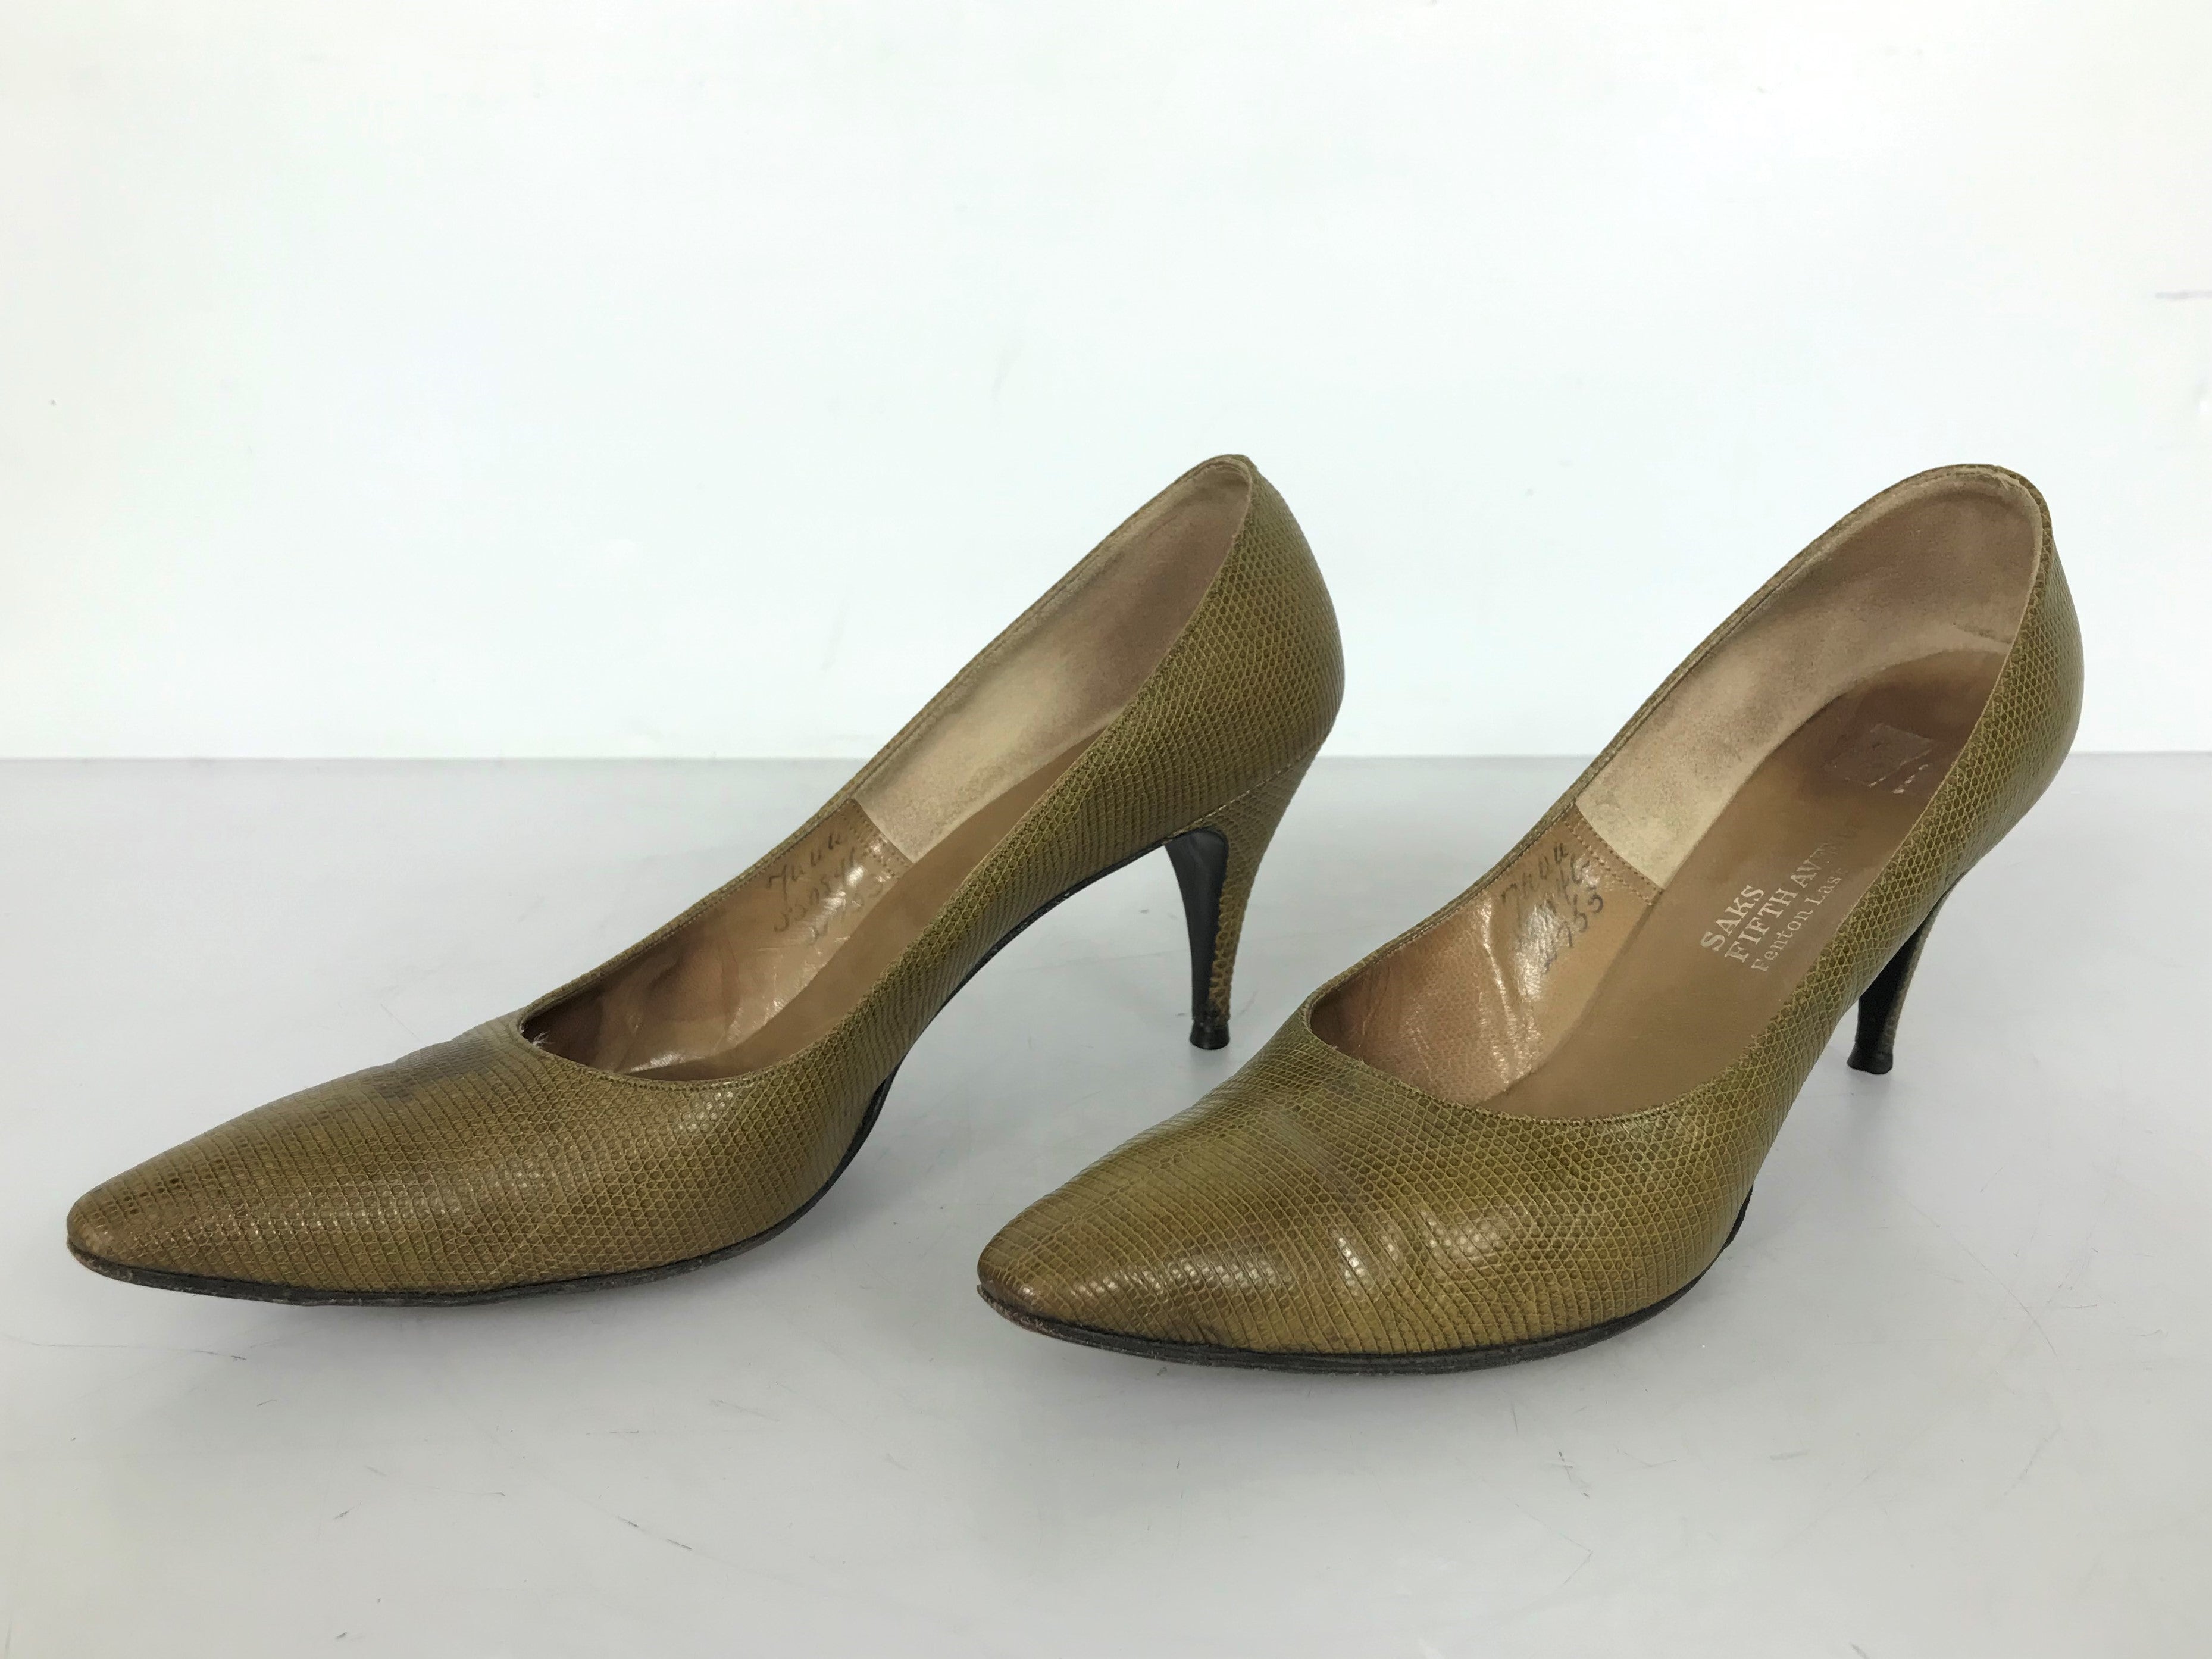 Saks Fifth Avenue Point-toe Leather Pumps